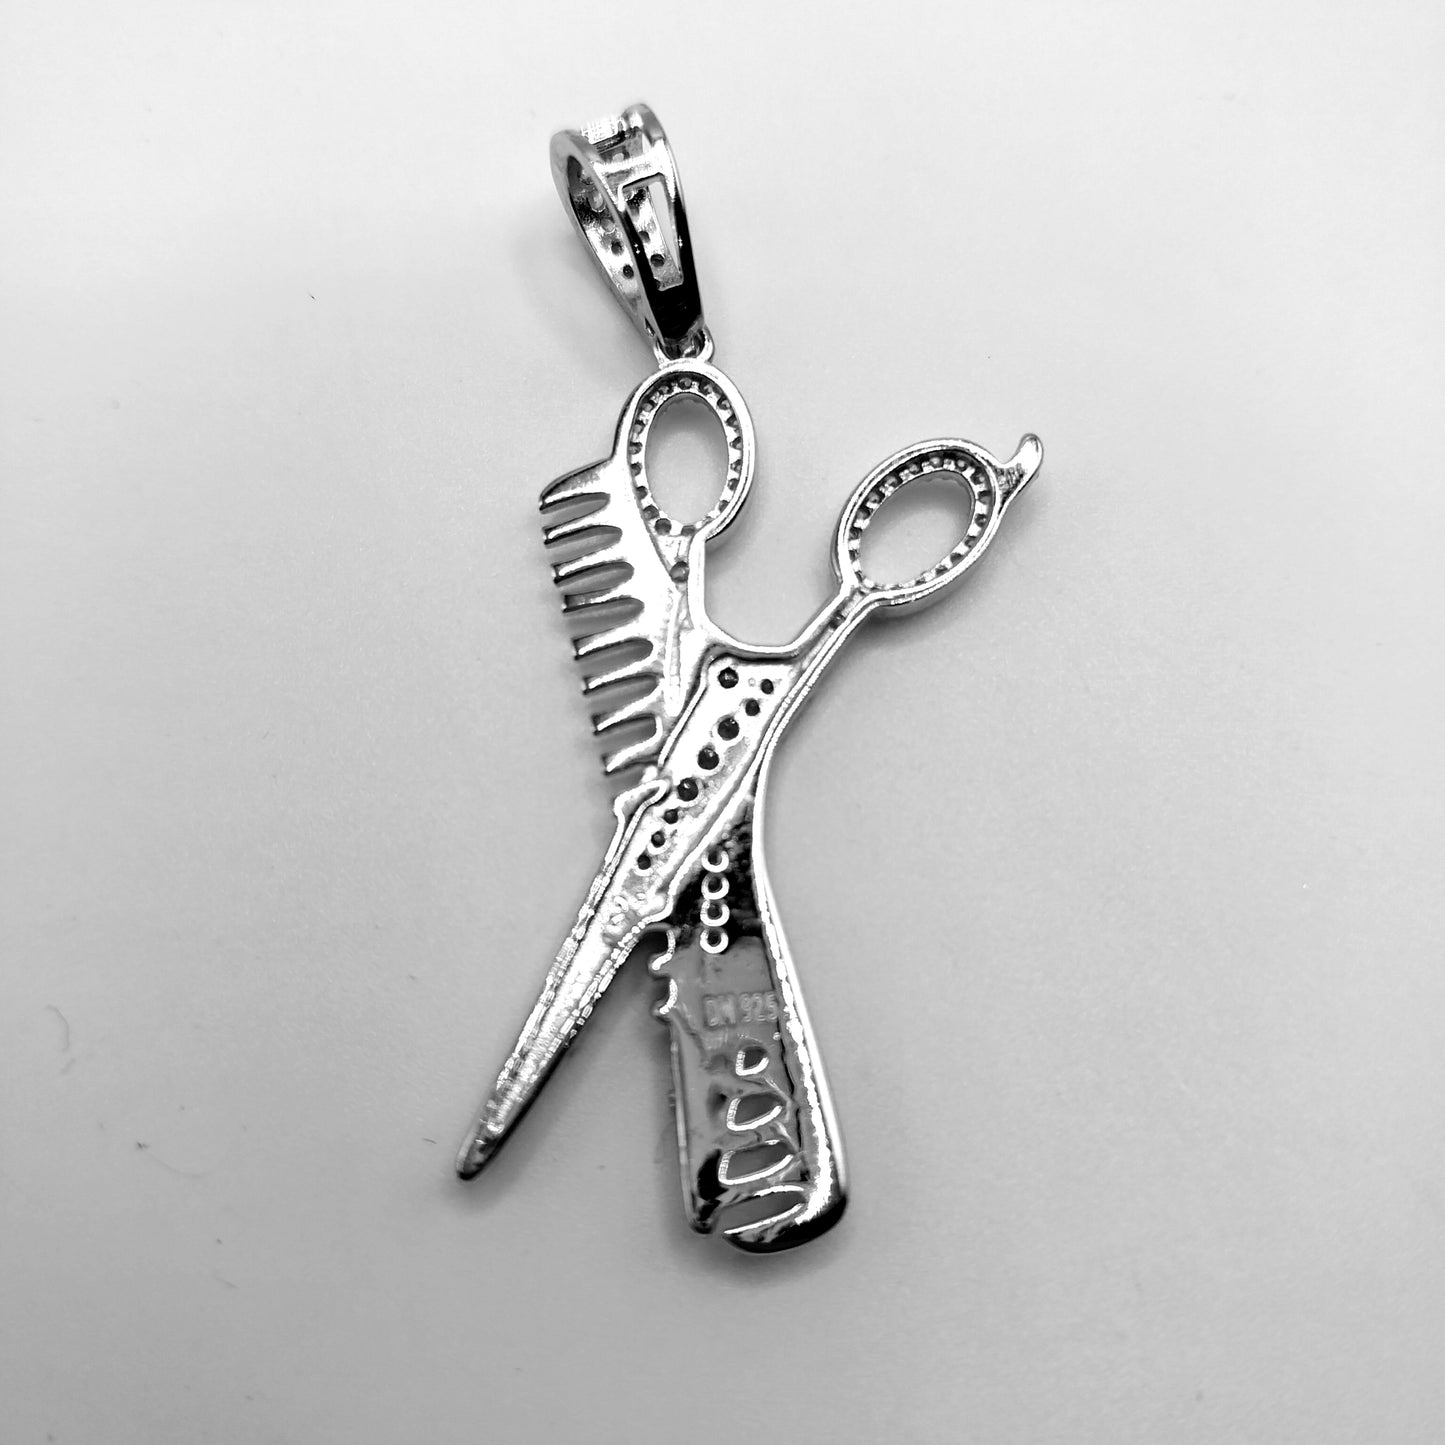 Scissors and Hair Comb Pendant Silver 925 with Cubic Zirconia's